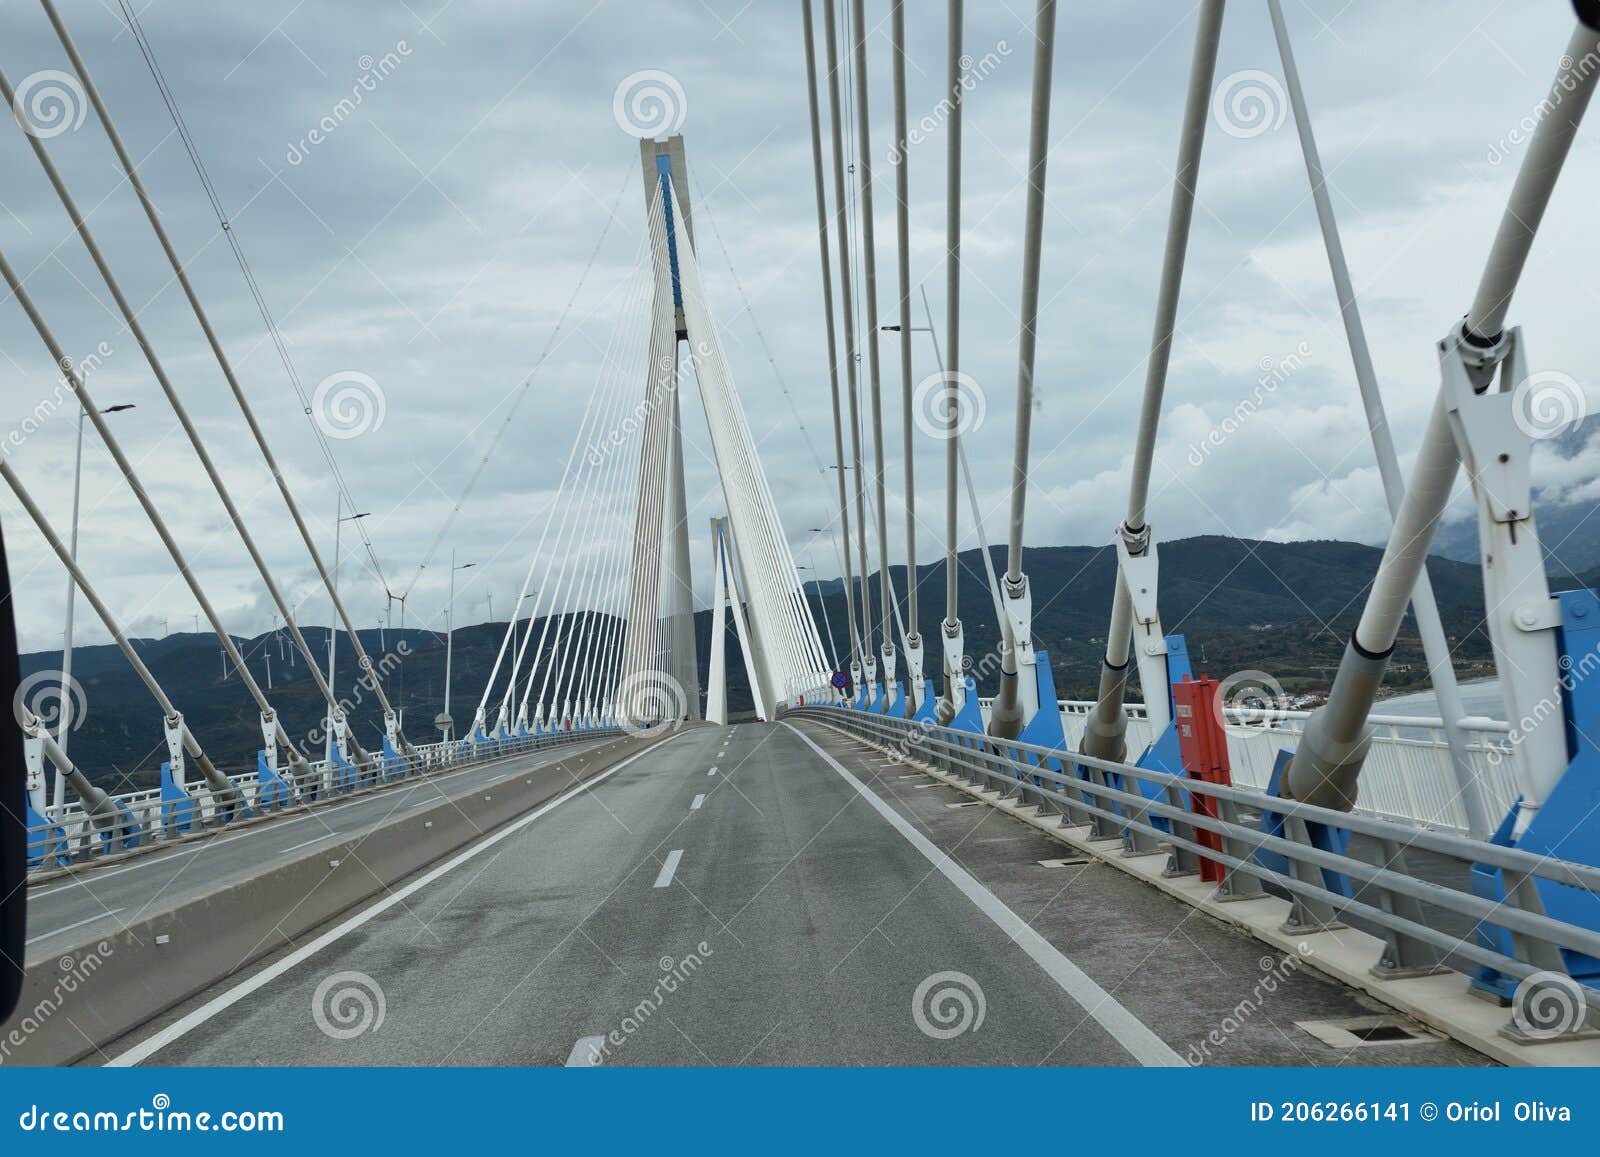 view of the main monuments and sites of greece. rio-antirio bridge